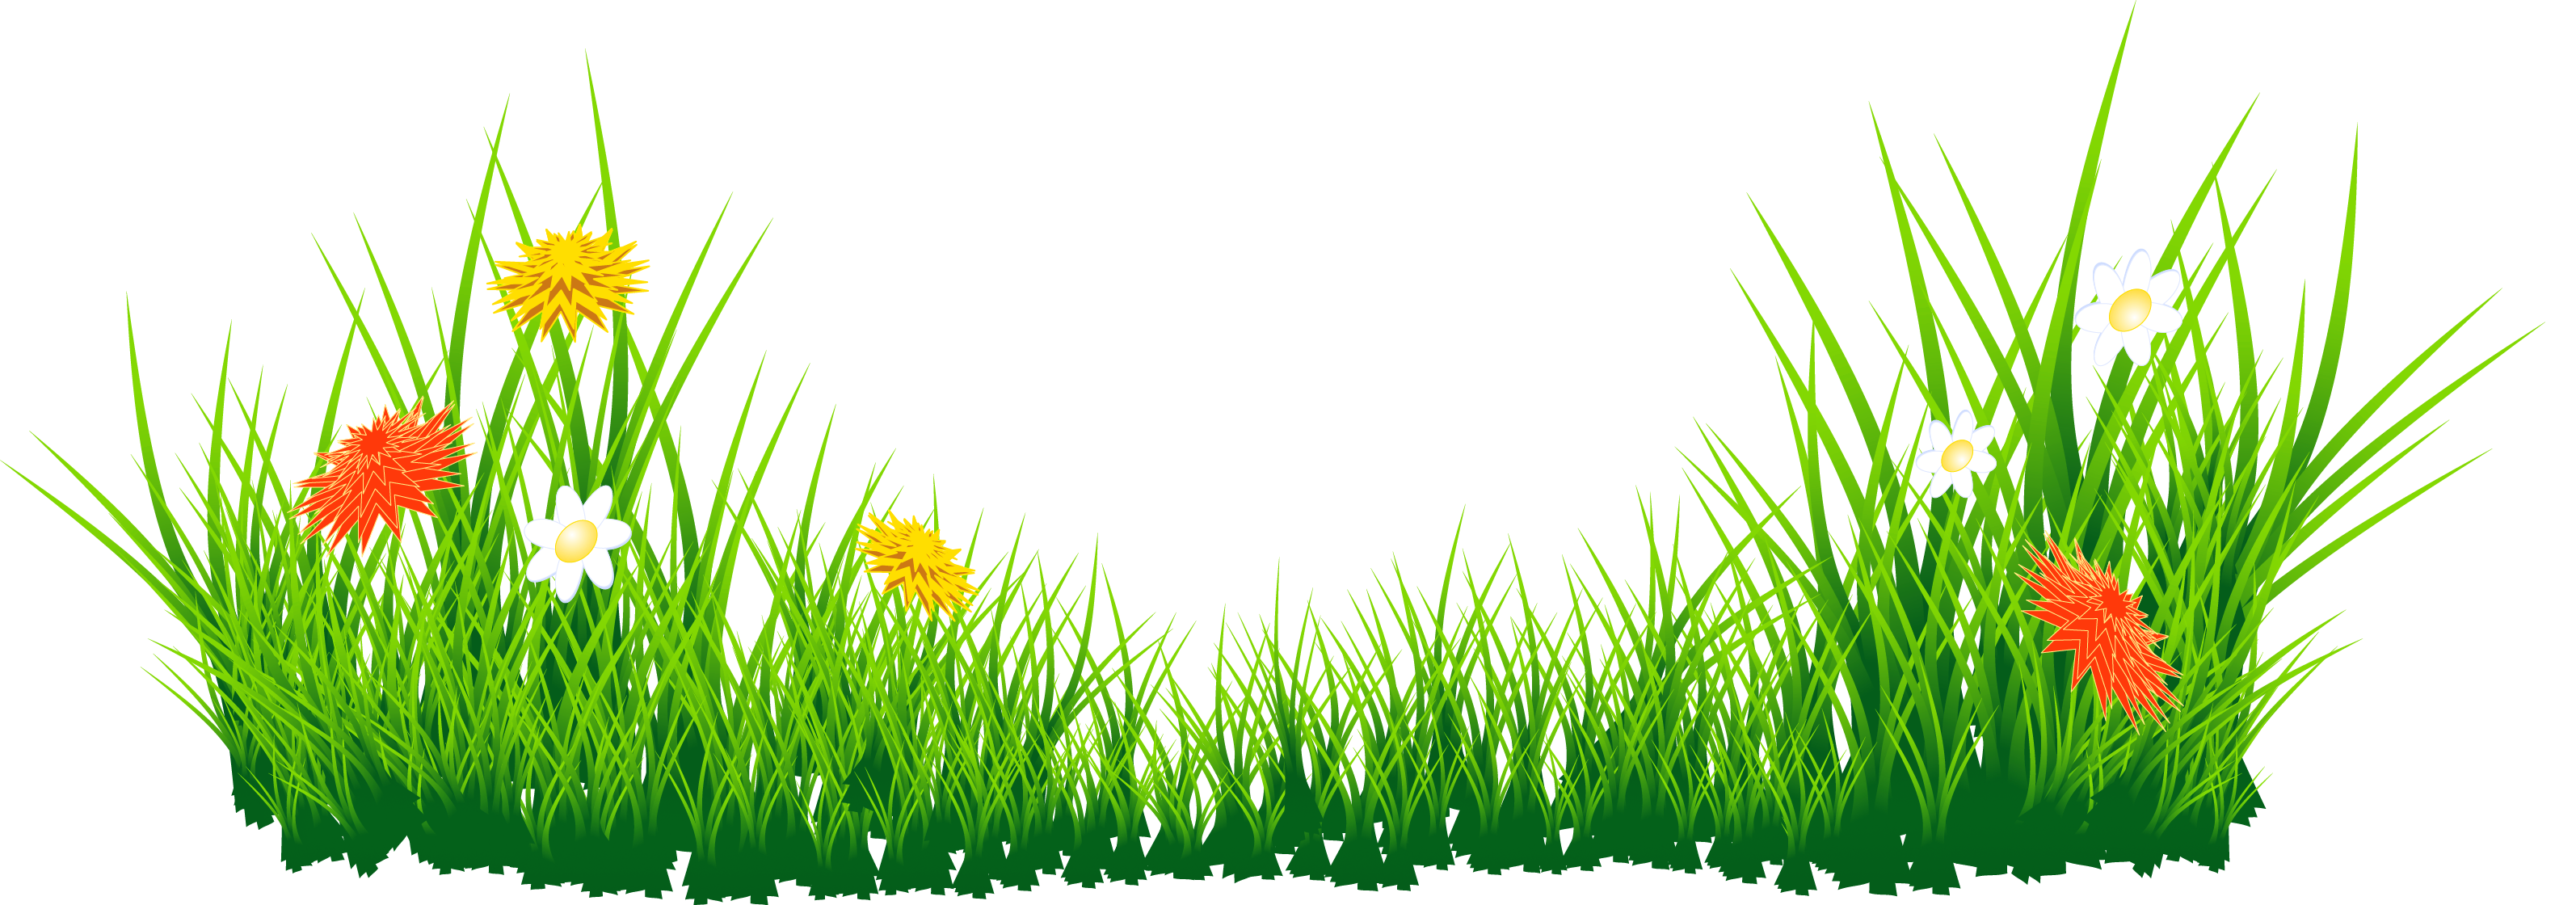 Free Grass Png Cartoon, Download Free Grass Png Cartoon png images